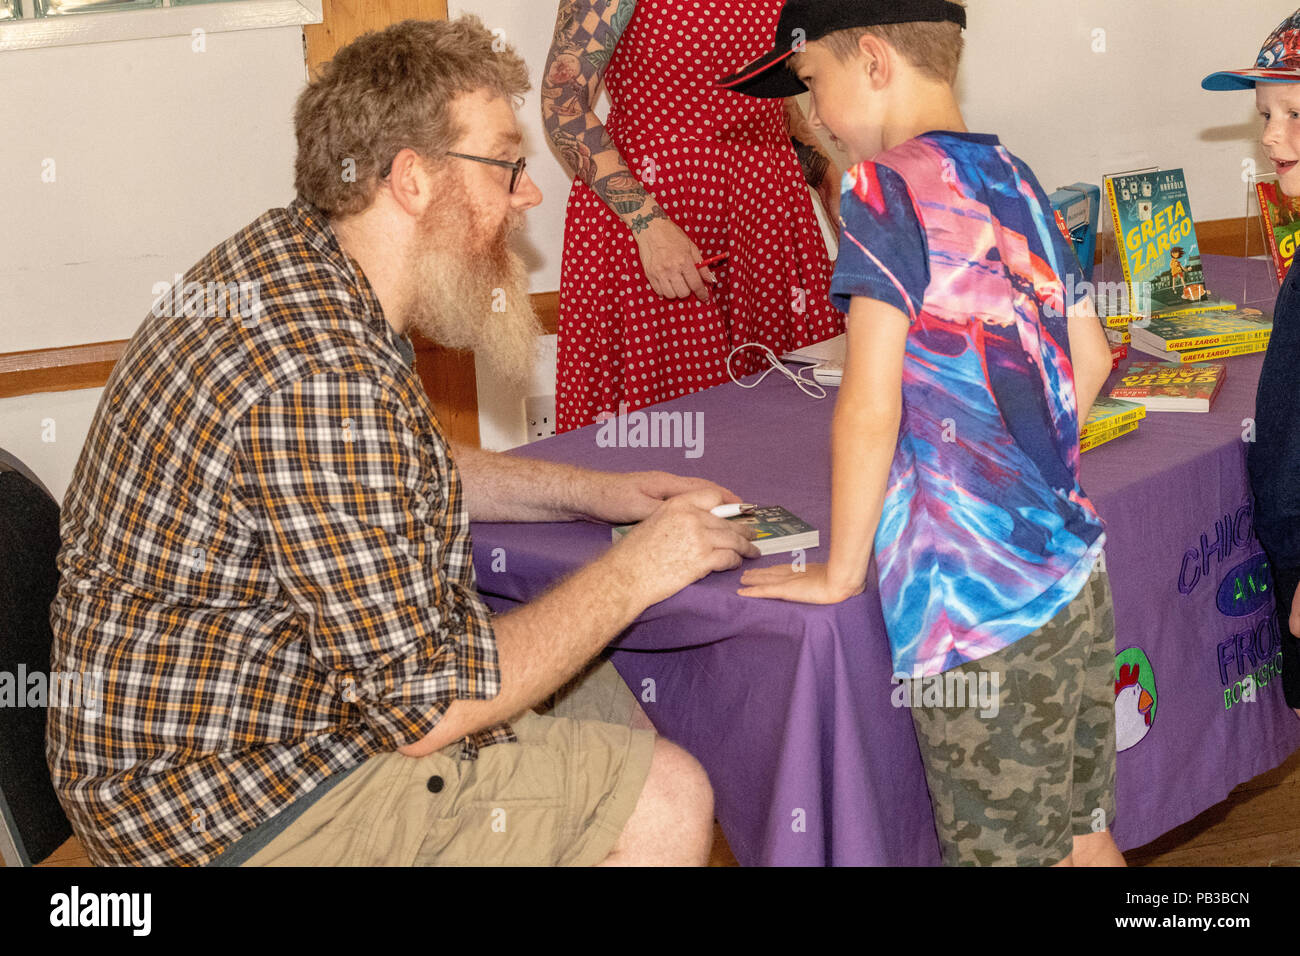 Brentwood, Essex, UK. 26th July 2018 Brentwood Children’s literary festival presented a workshop by A F Harrold, poet, writer and performance artist.  Author of Greta Zargo and the Death Robots from Outer Space and Greta Zargo and the Amoeba Monsters from the Middle of the Earth. Credit Ian Davidson/Alamy Live News Stock Photo